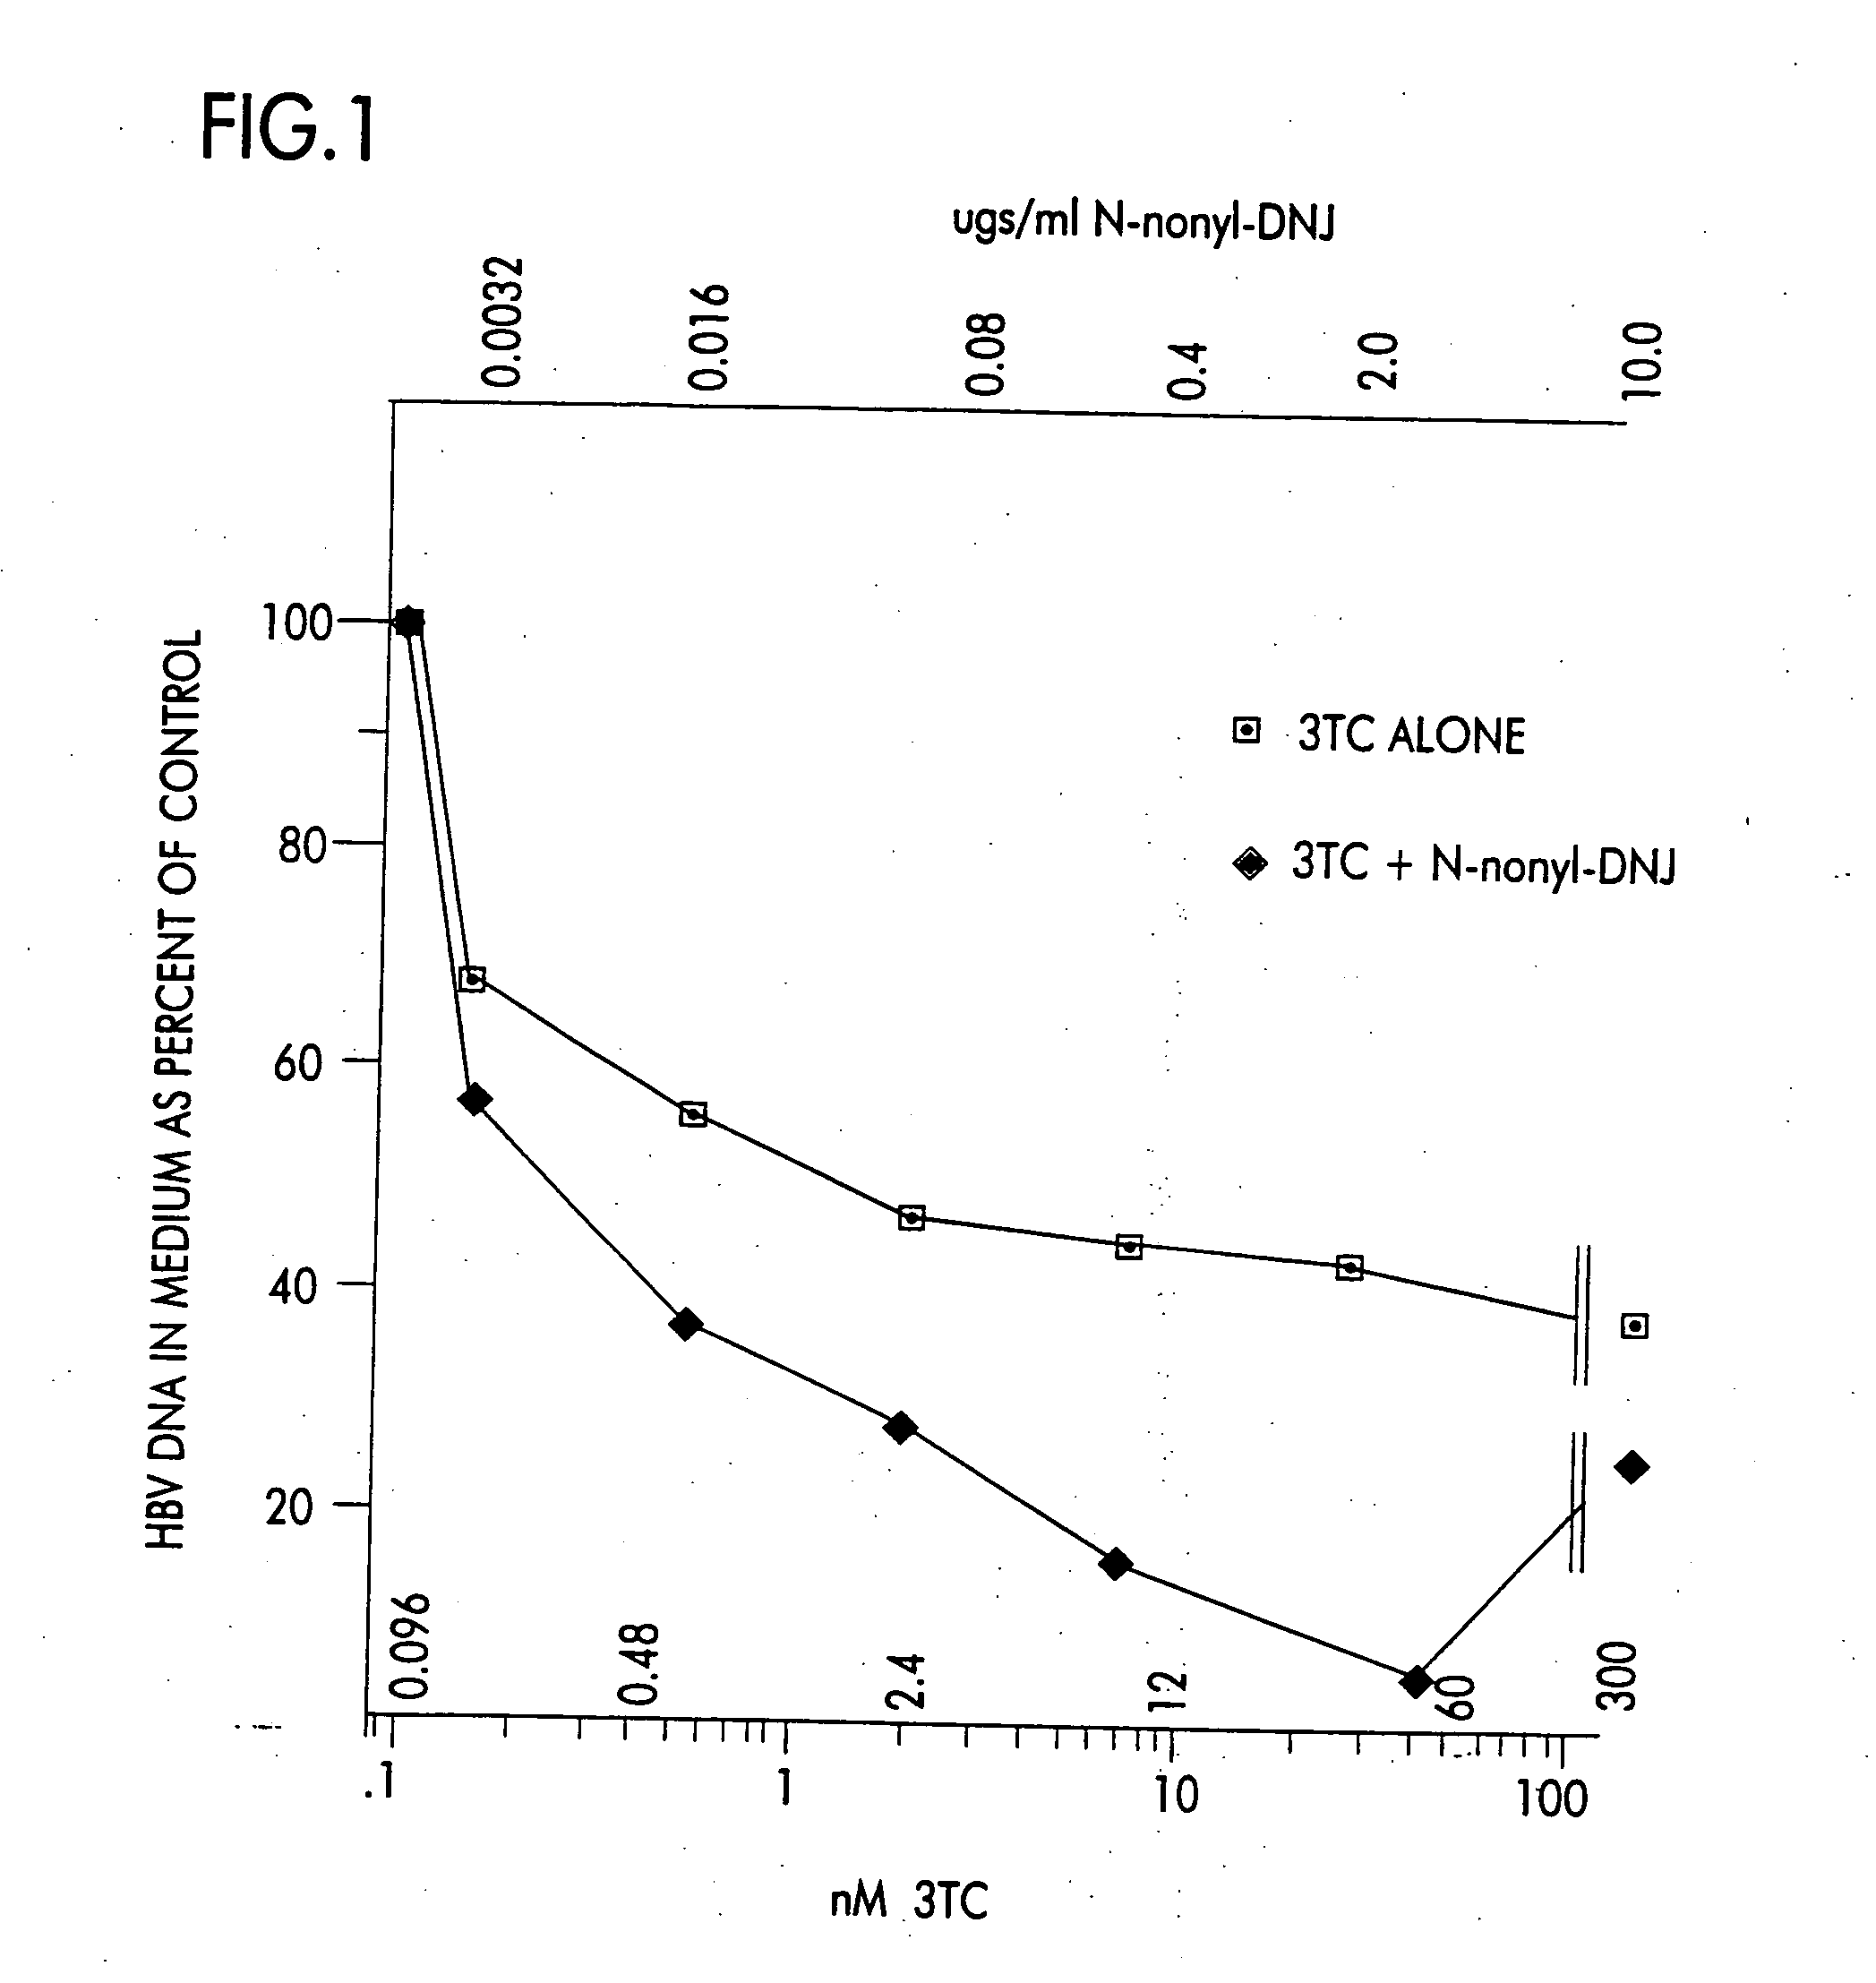 Compositions of treating hepatitis virus infections with N-substituted-1,5-dideoxy-1,5-imino-D-glucitol compounds in combination therapy